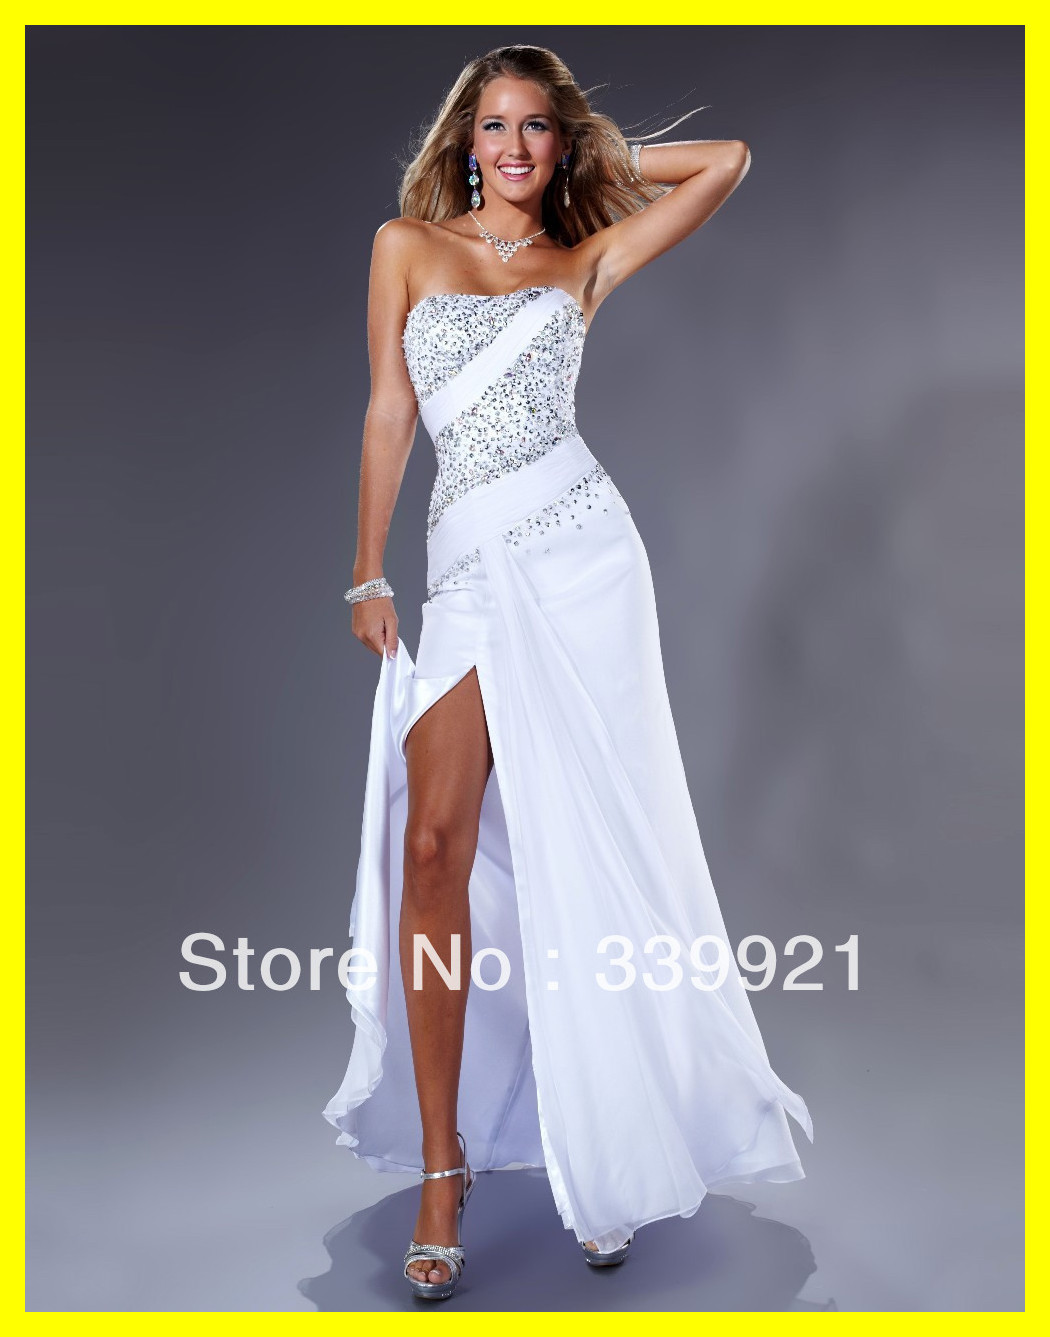 Places That Sell Homecoming Dresses & Always In Fashion For All Occasions